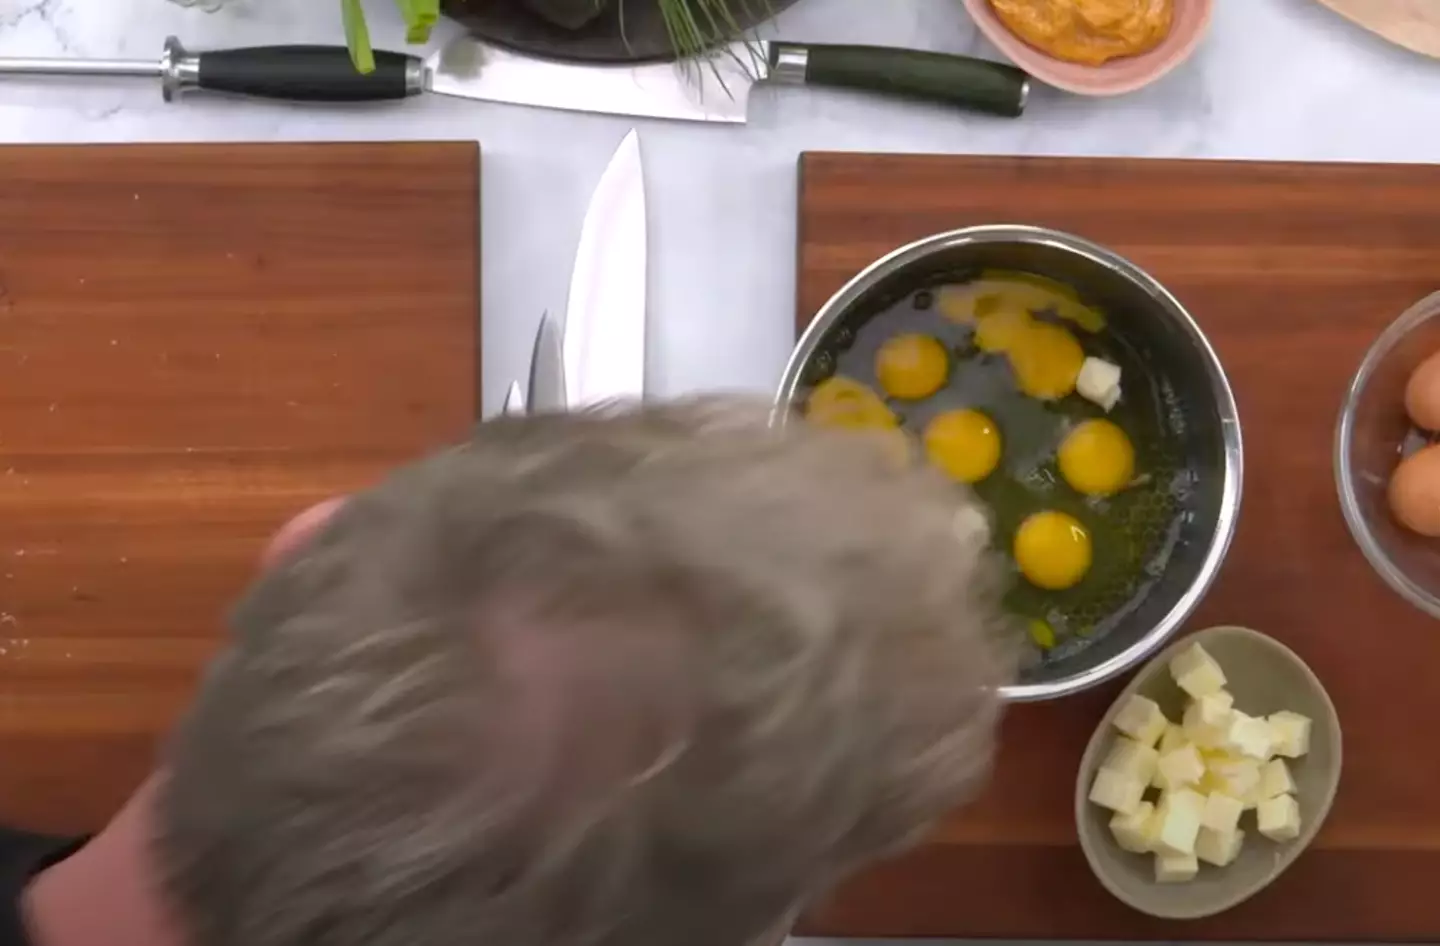 Gordon Ramsay realising there are too many eggs and changing up the recipe.